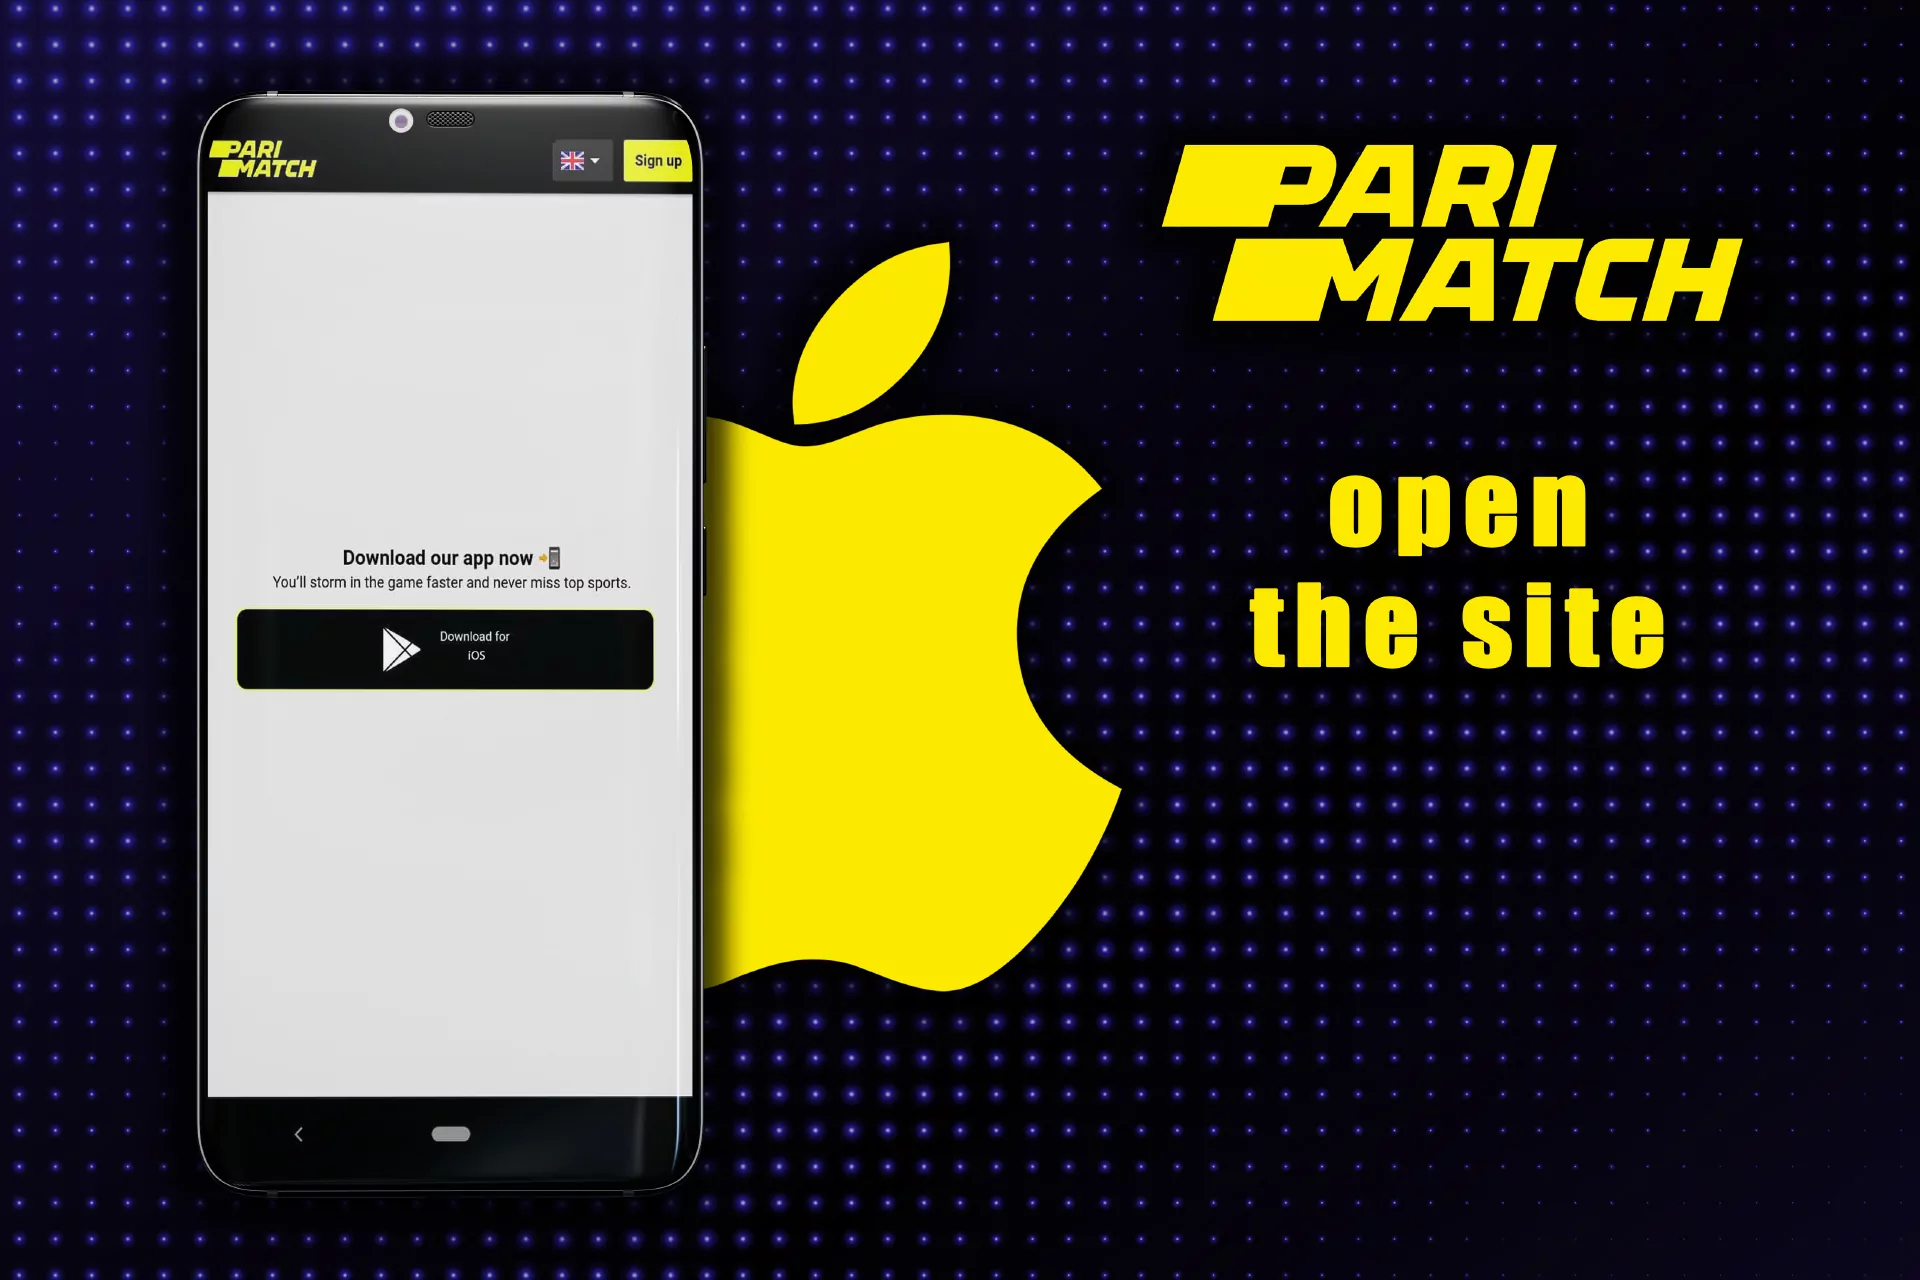 Open the website of Parimatch at the app page.